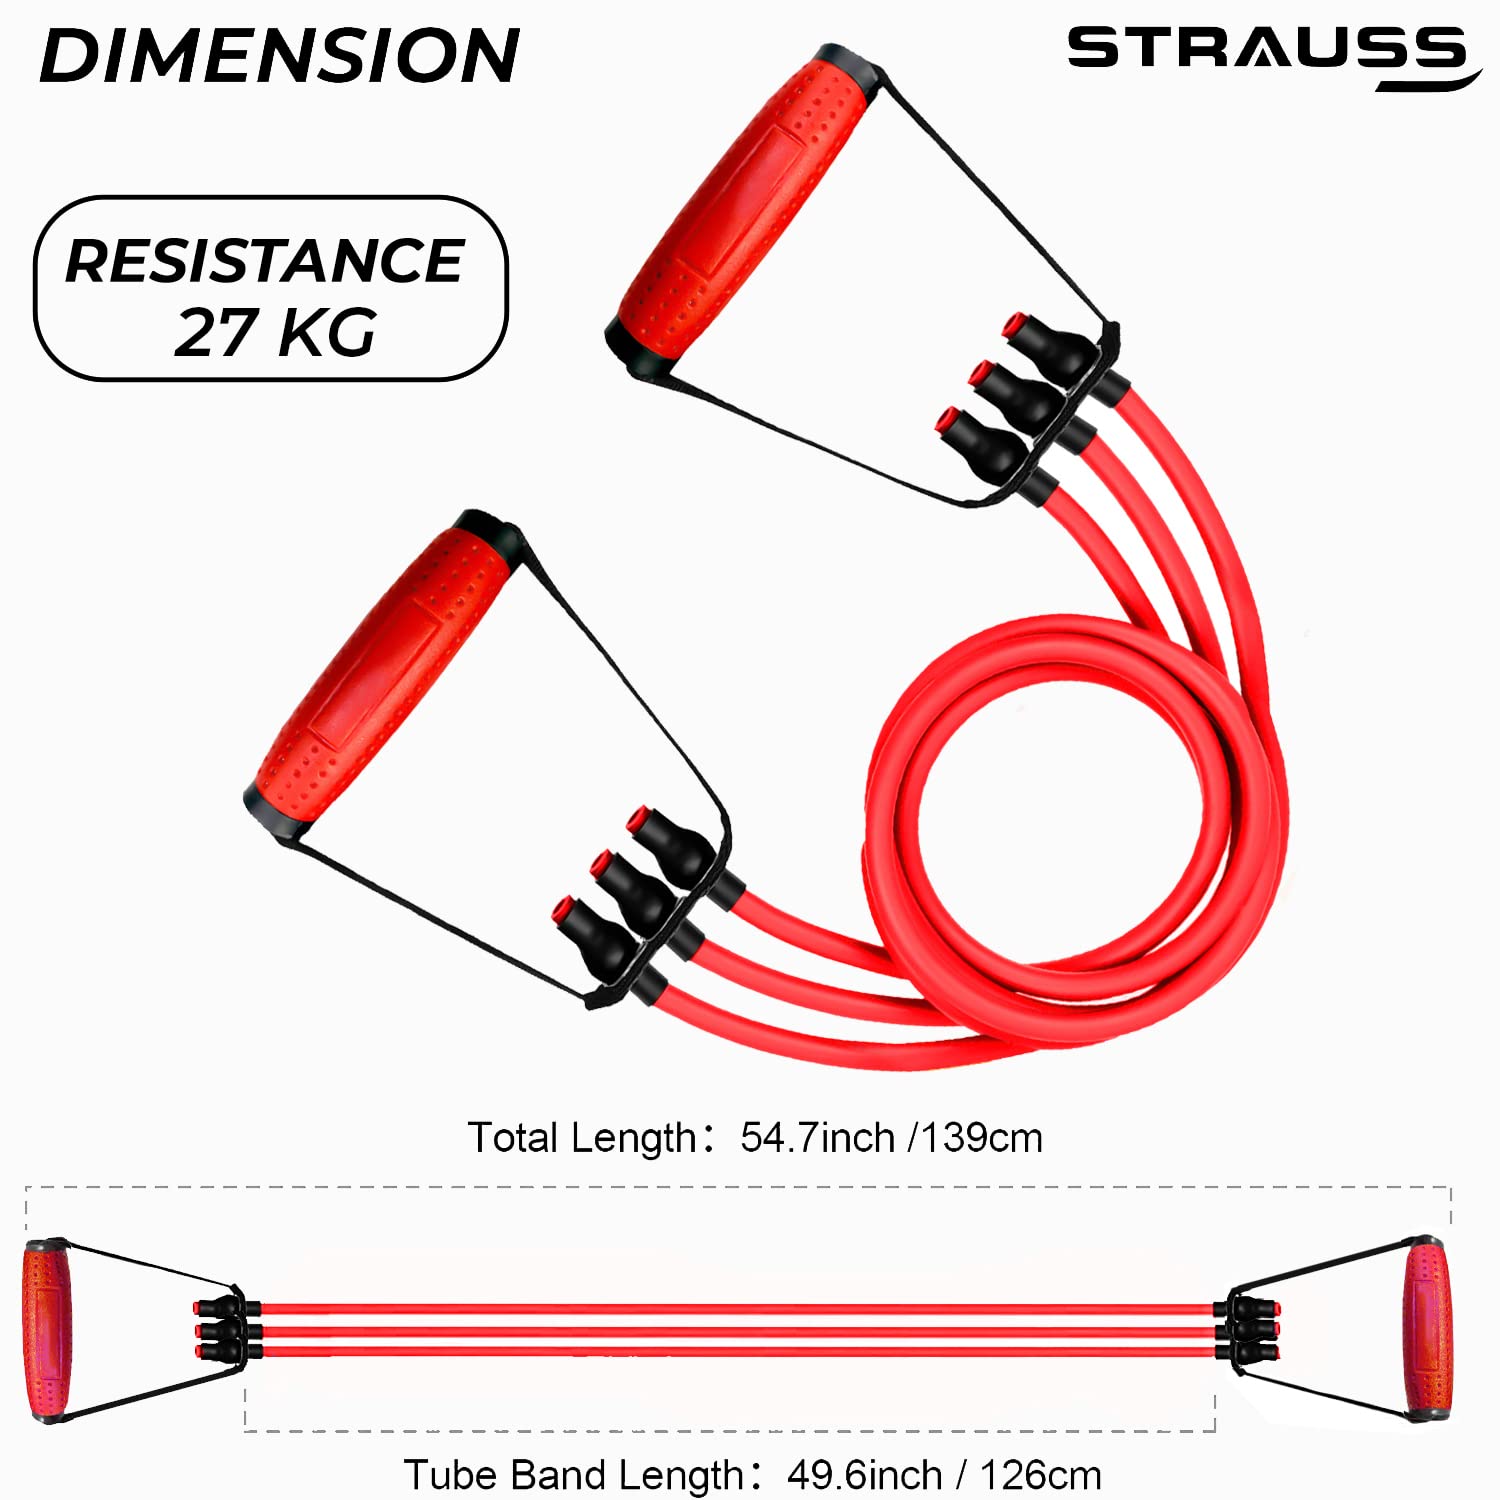 Strauss Triple Resistance Tube with PVC Handles, Door Knob & Carry Bag, 27 Kg, (Red)